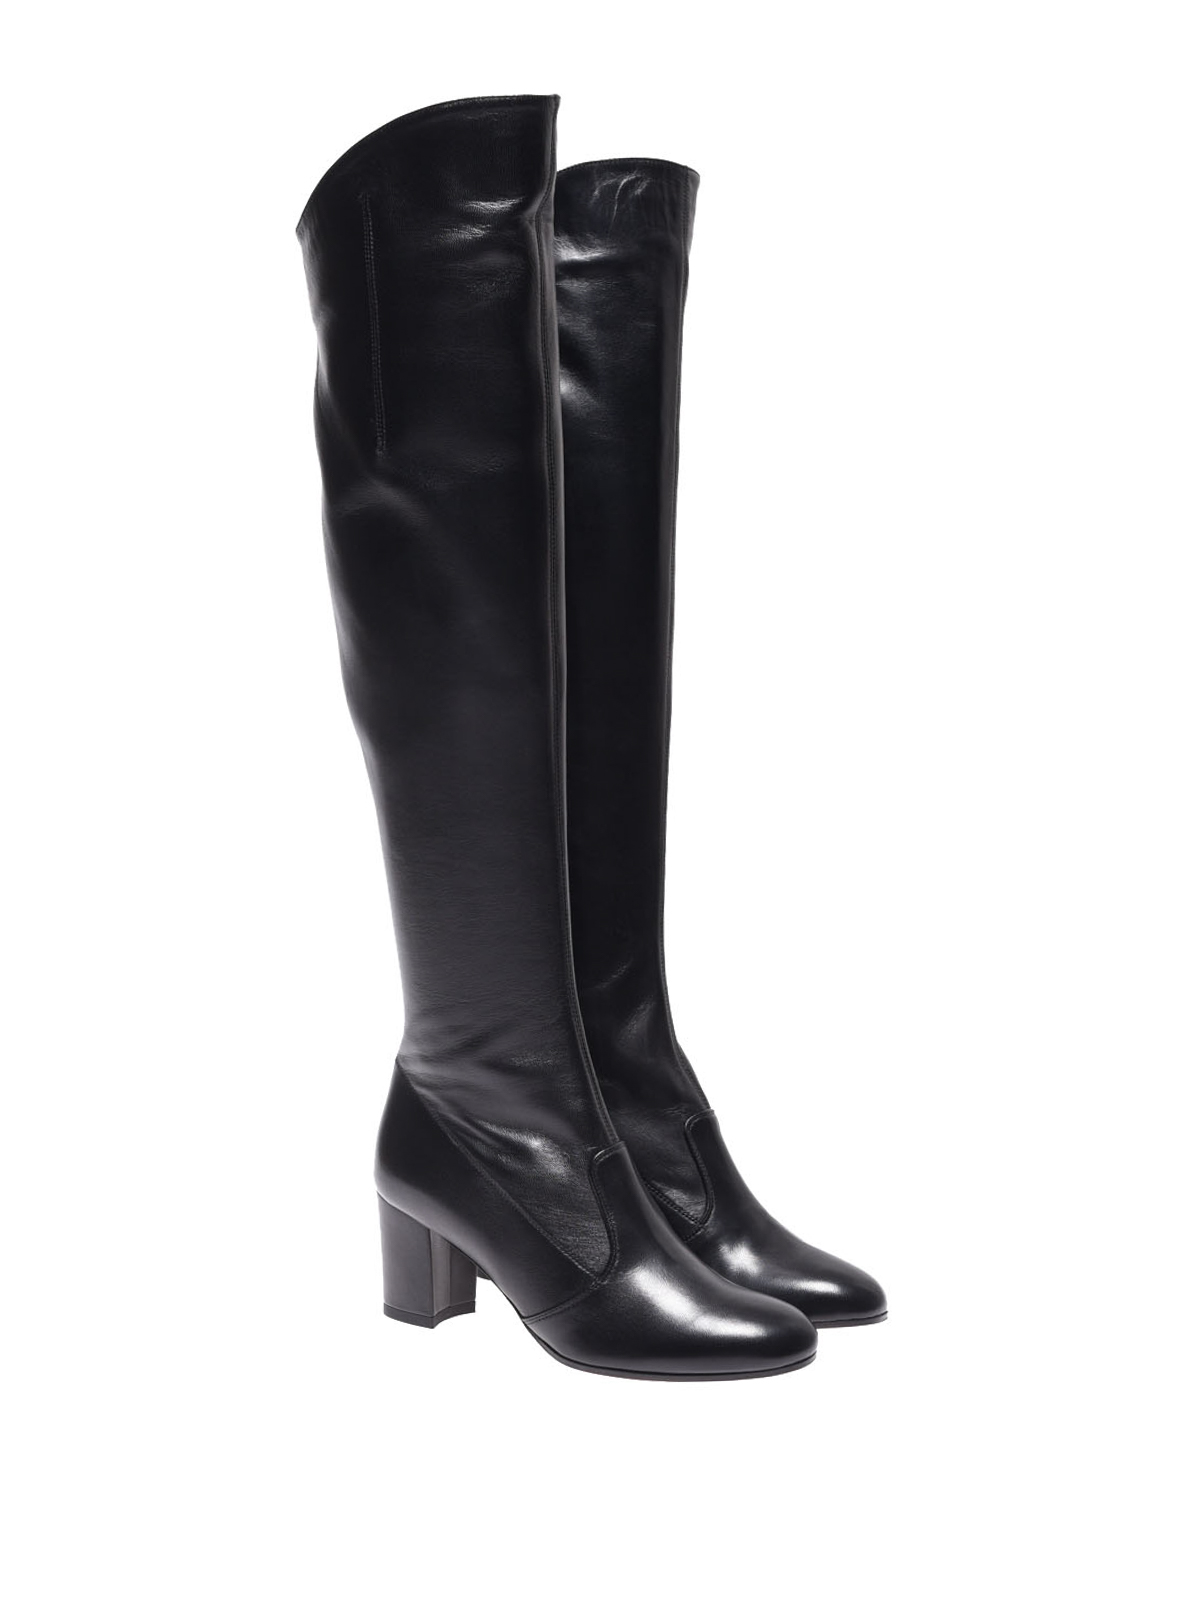 Boots L' Autre Chose - Leather knee height boots - LD979770WP26151001